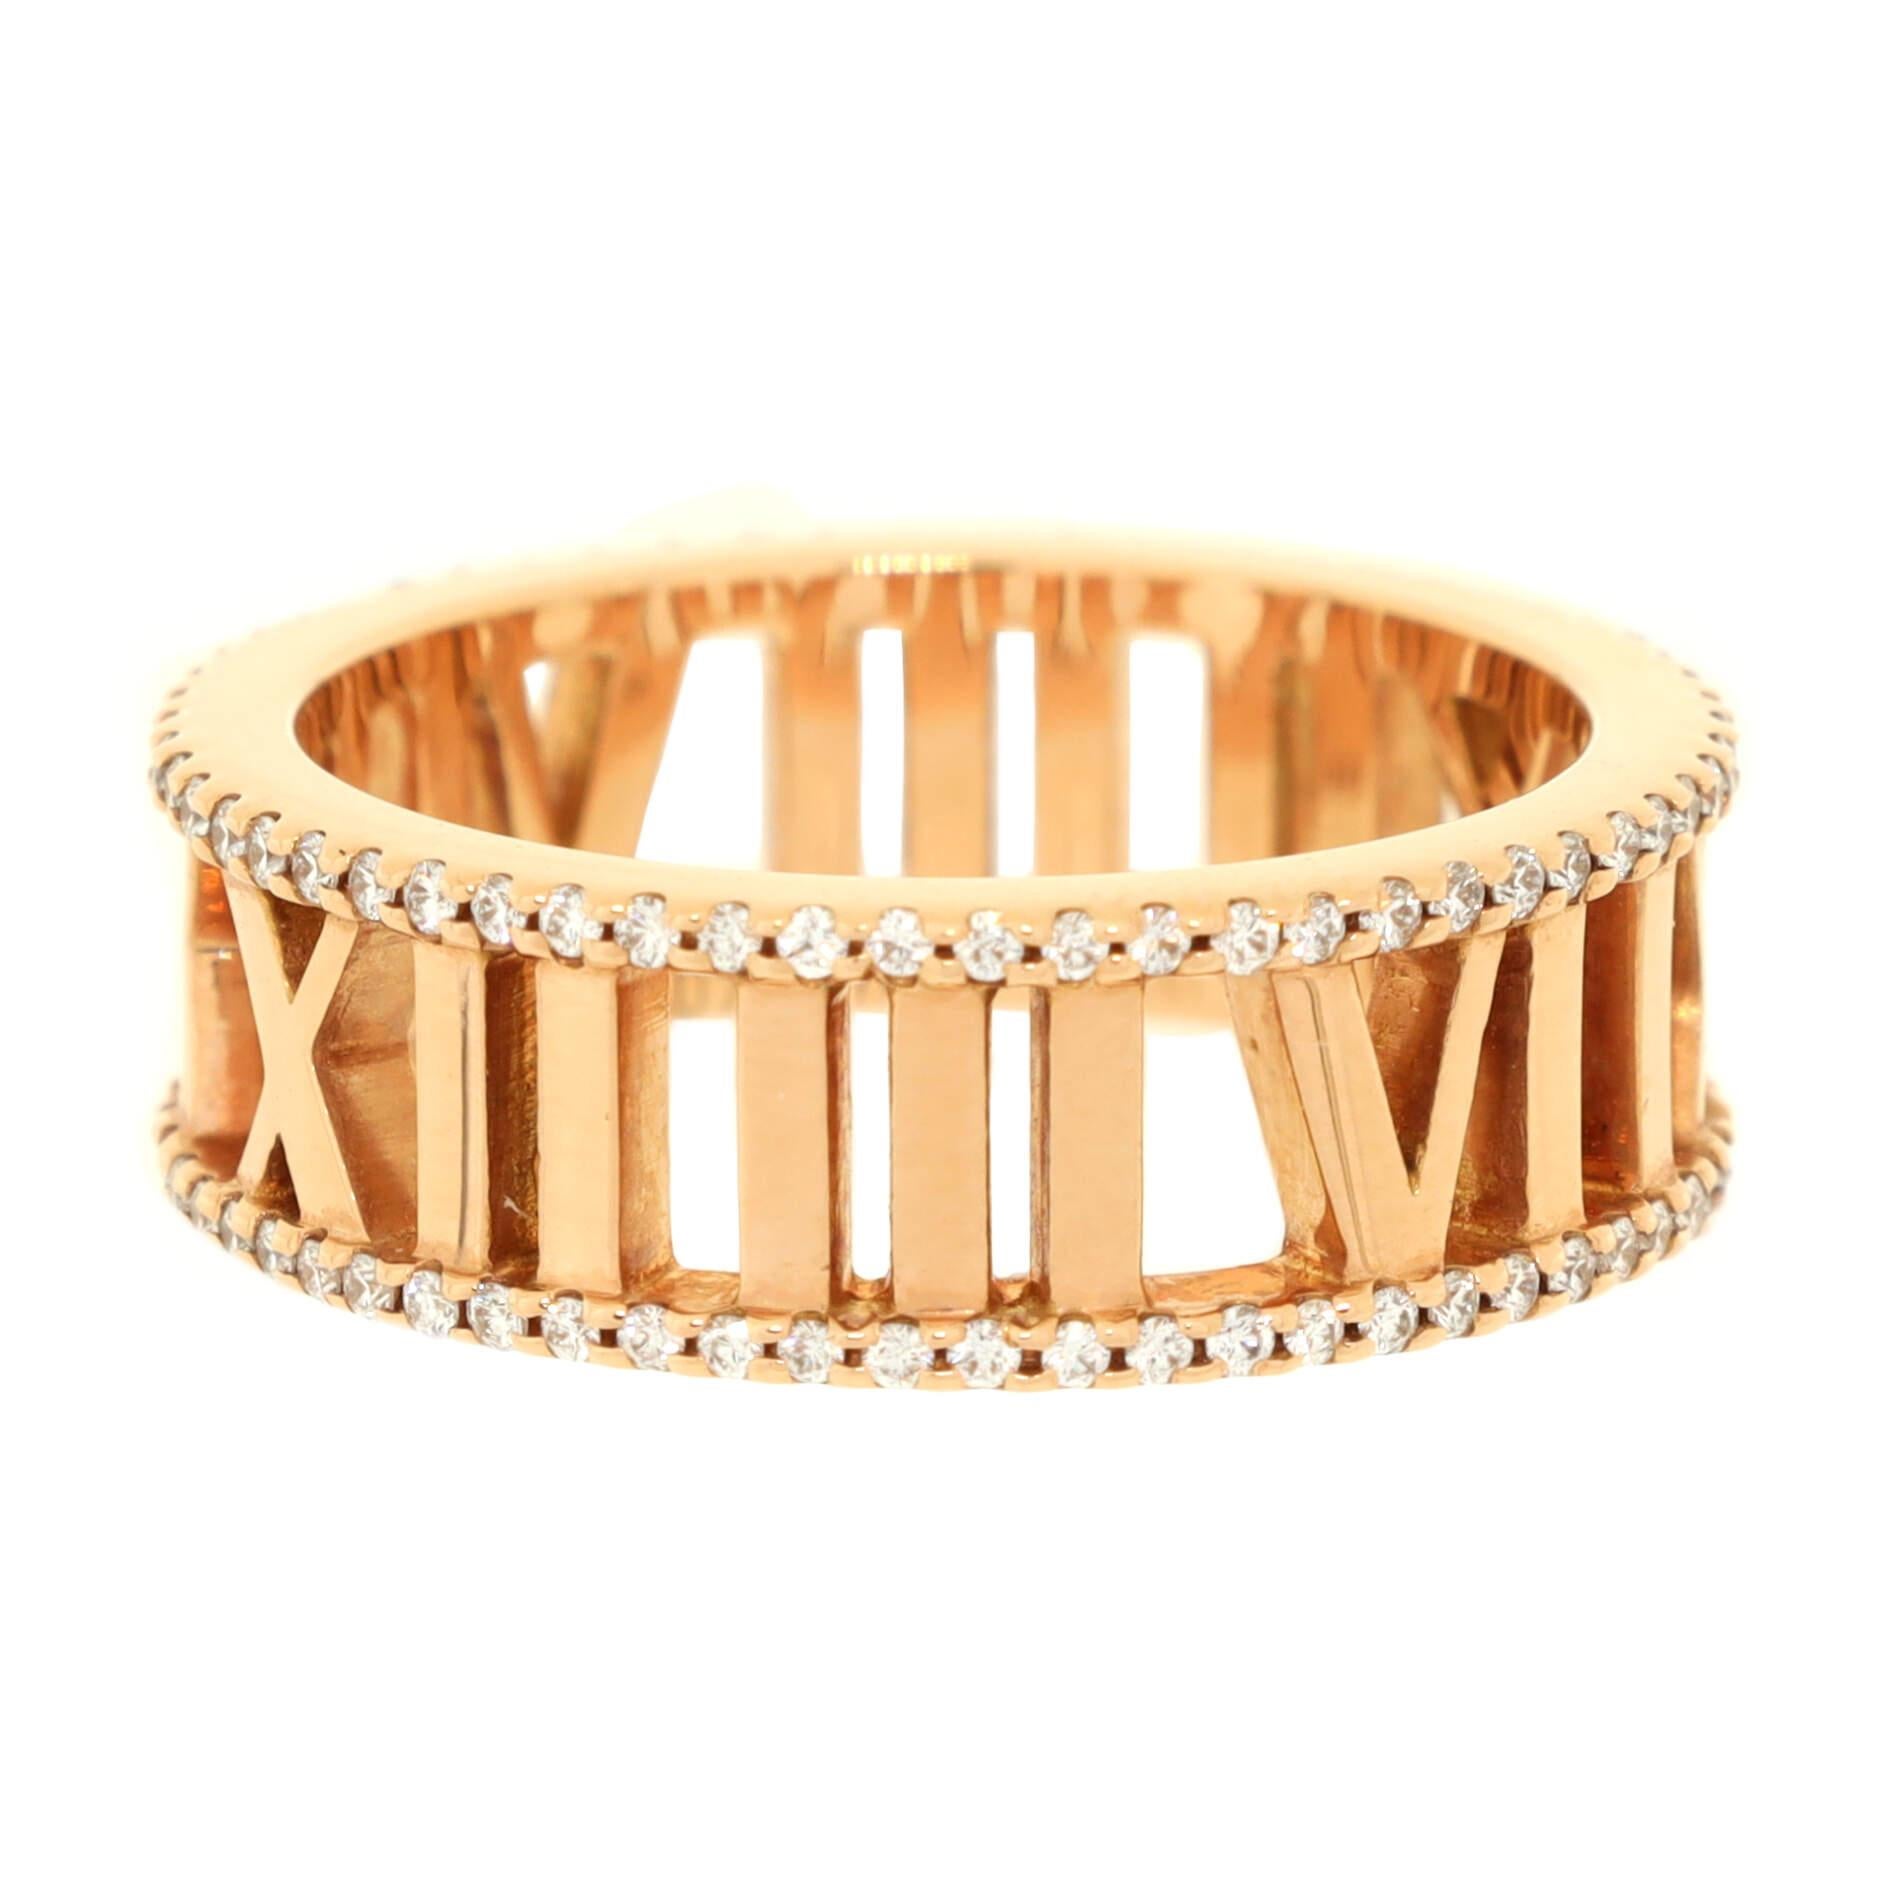 Condition: Great. Minor wear throughout.
Accessories: No Accessories
Measurements: Size: 7, Width: 6.75 mm
Designer: Tiffany & Co.
Model: Atlas Open Ring 18K Rose Gold with Diamond 7mm
Exterior Color: Rose Gold
Item Number: 211862/133